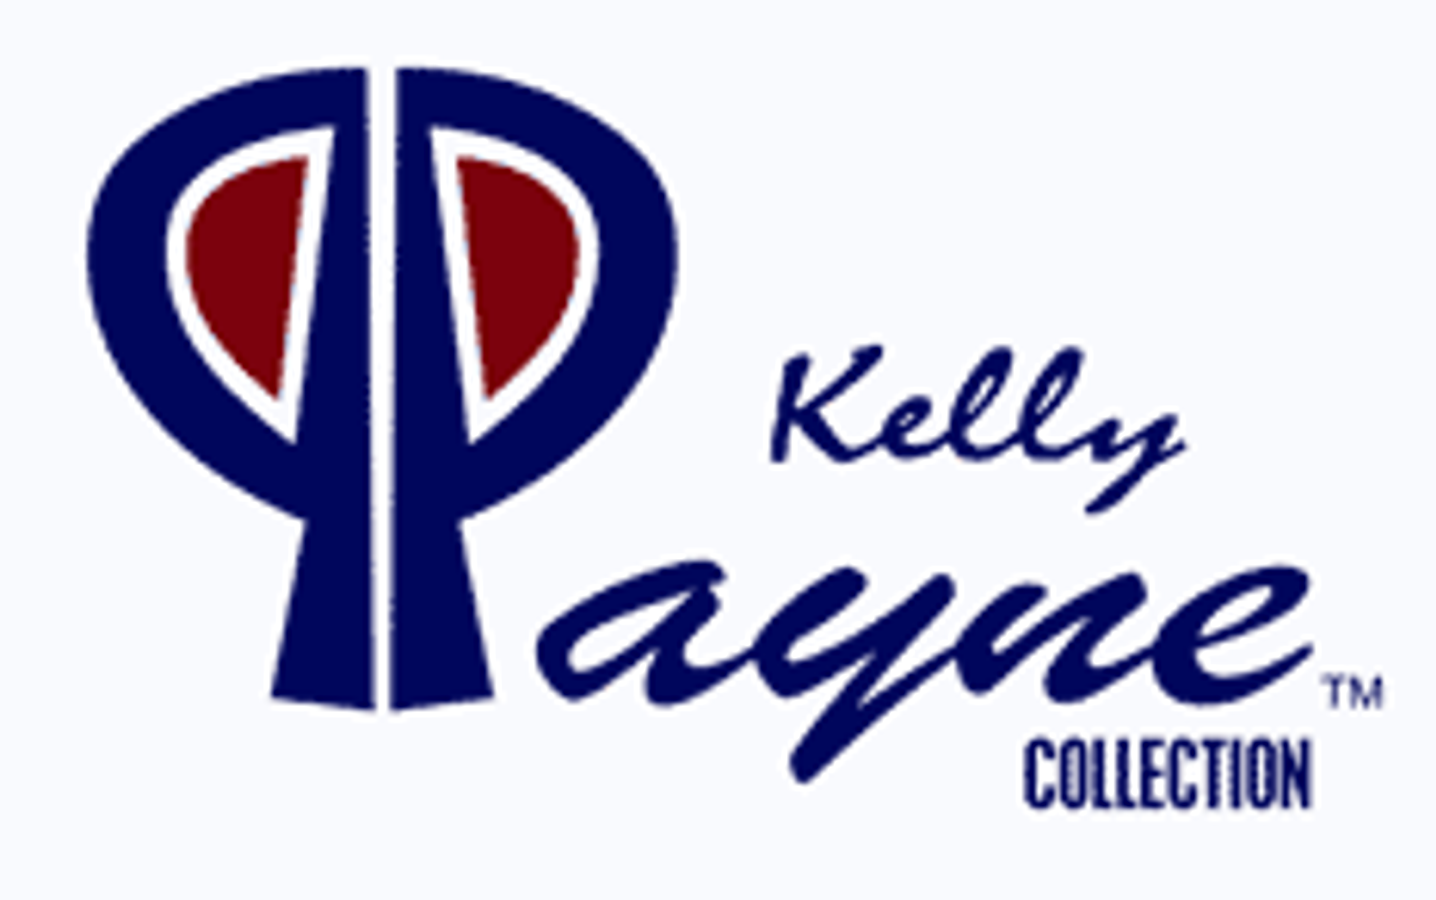 Kelly Payne Collection